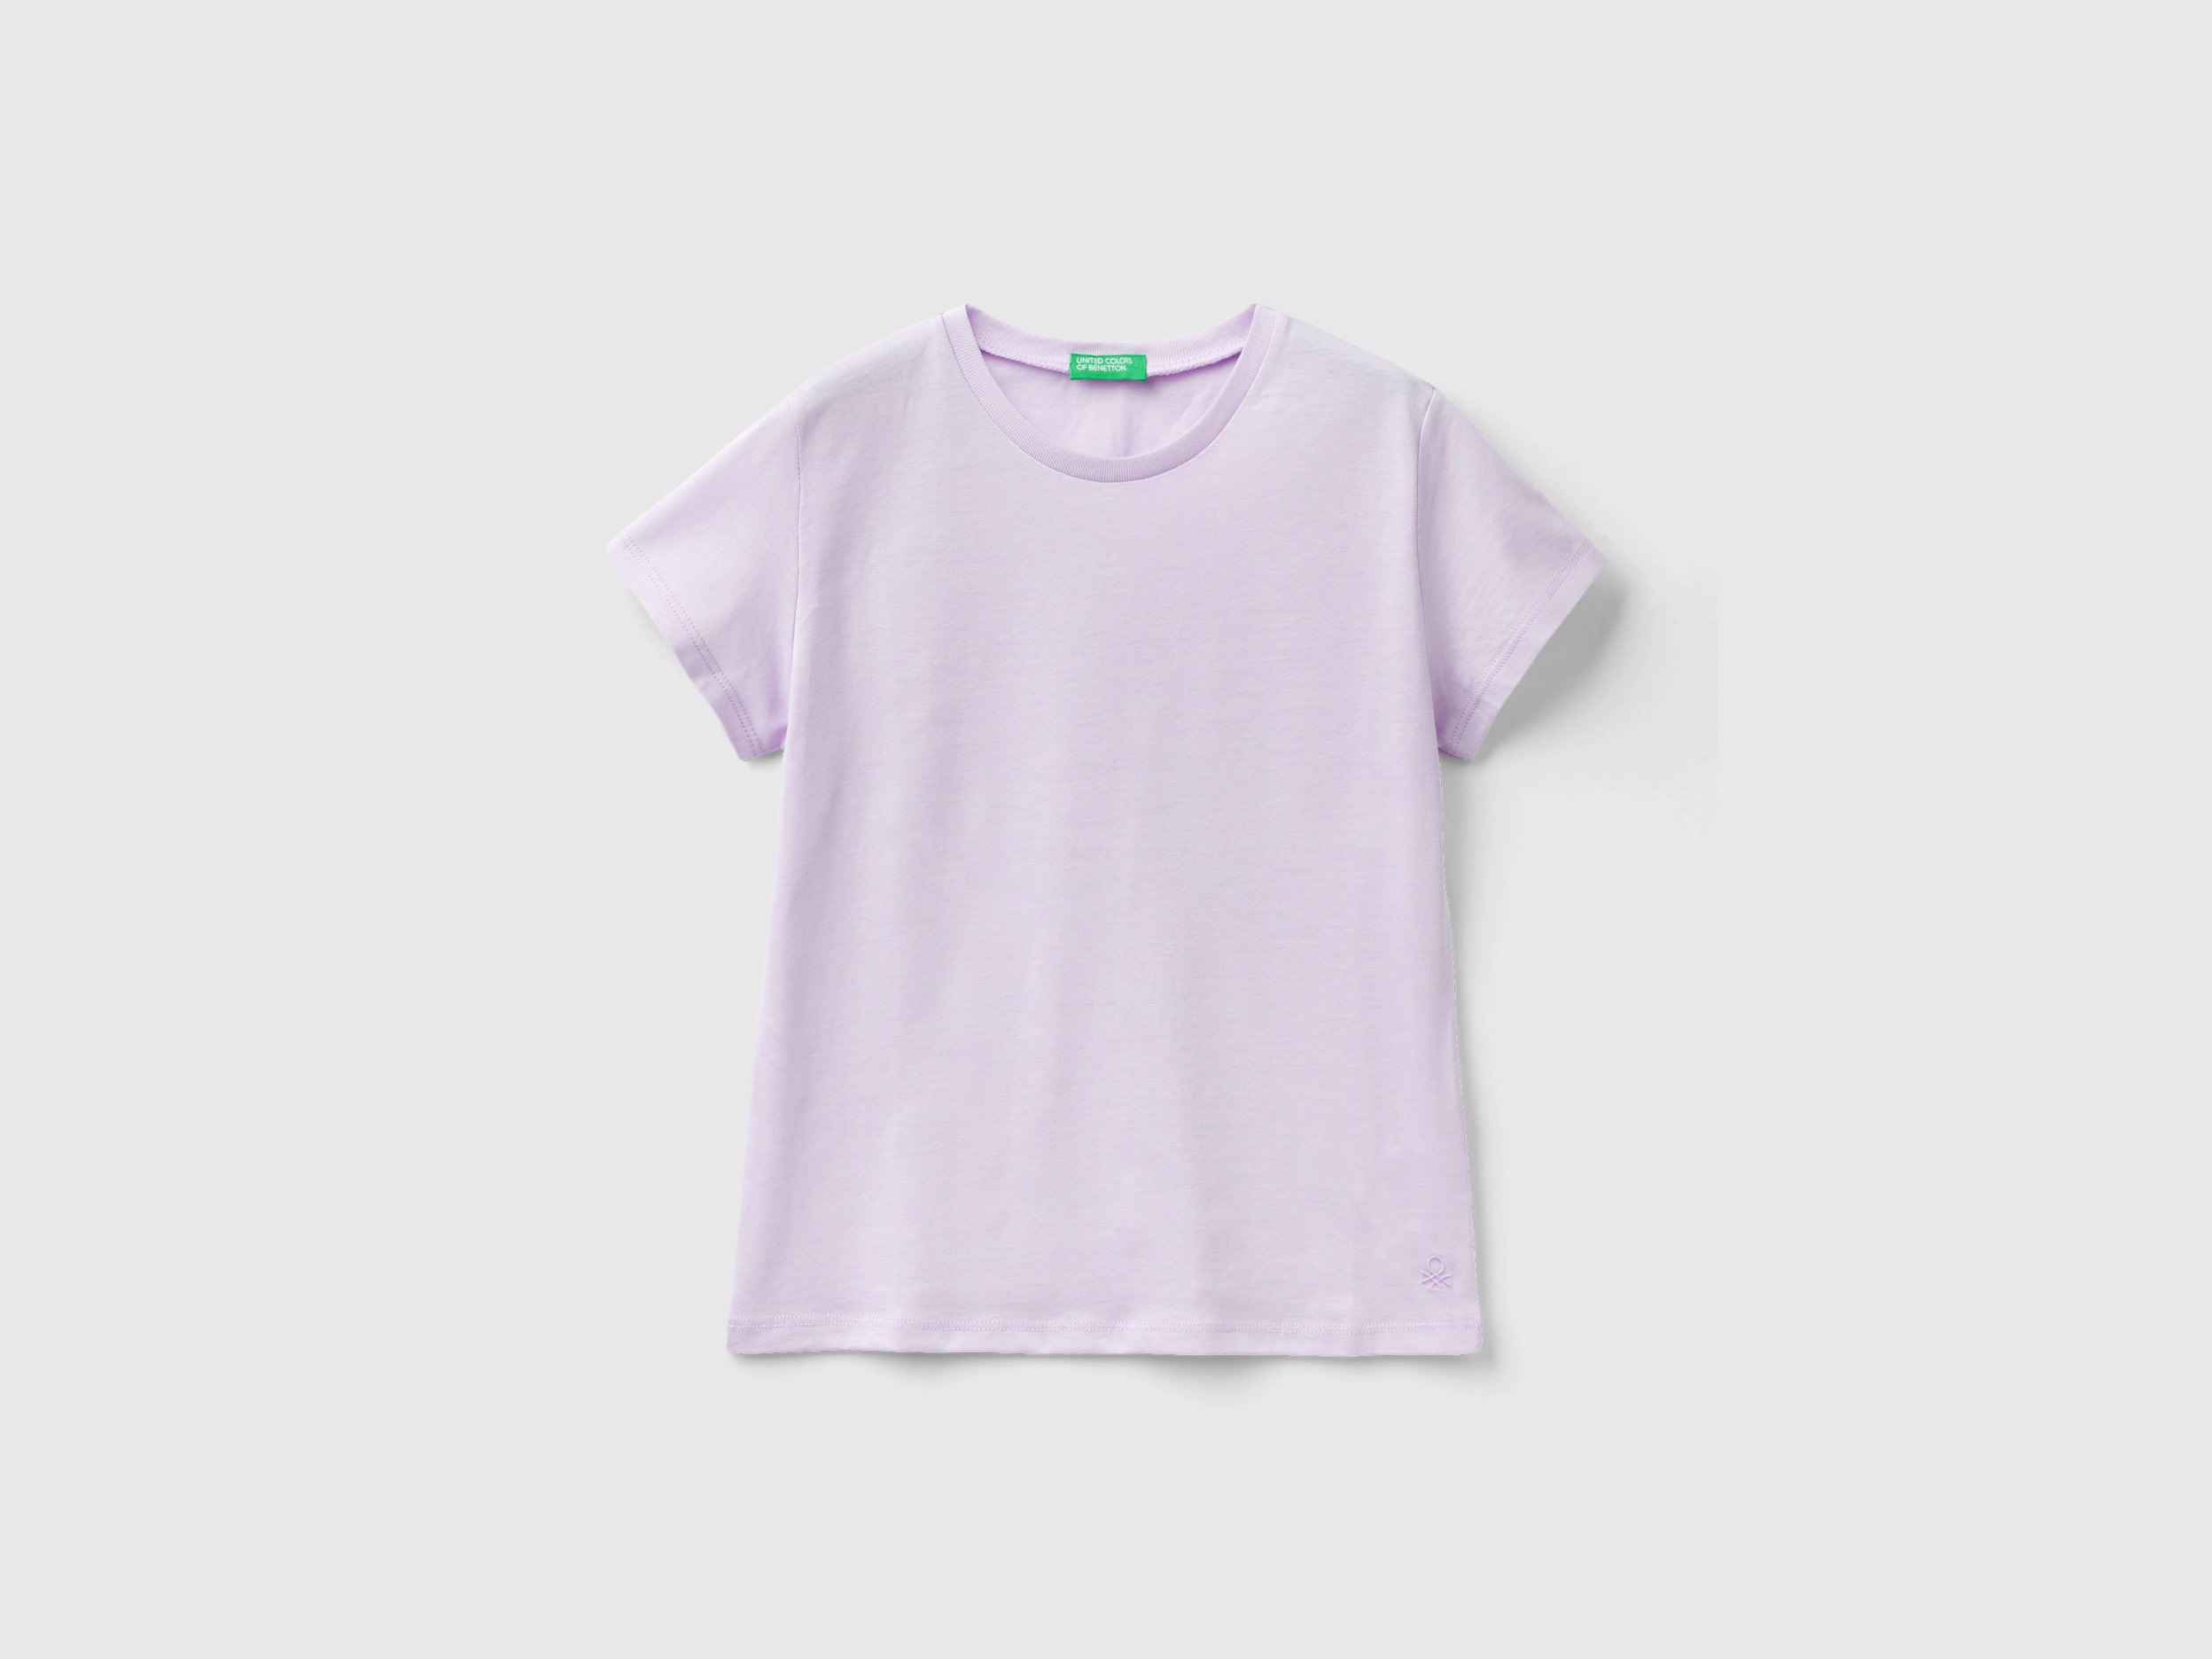 Image of Benetton, T-shirt In Pure Organic Cotton, size 3XL, Lilac, Kids